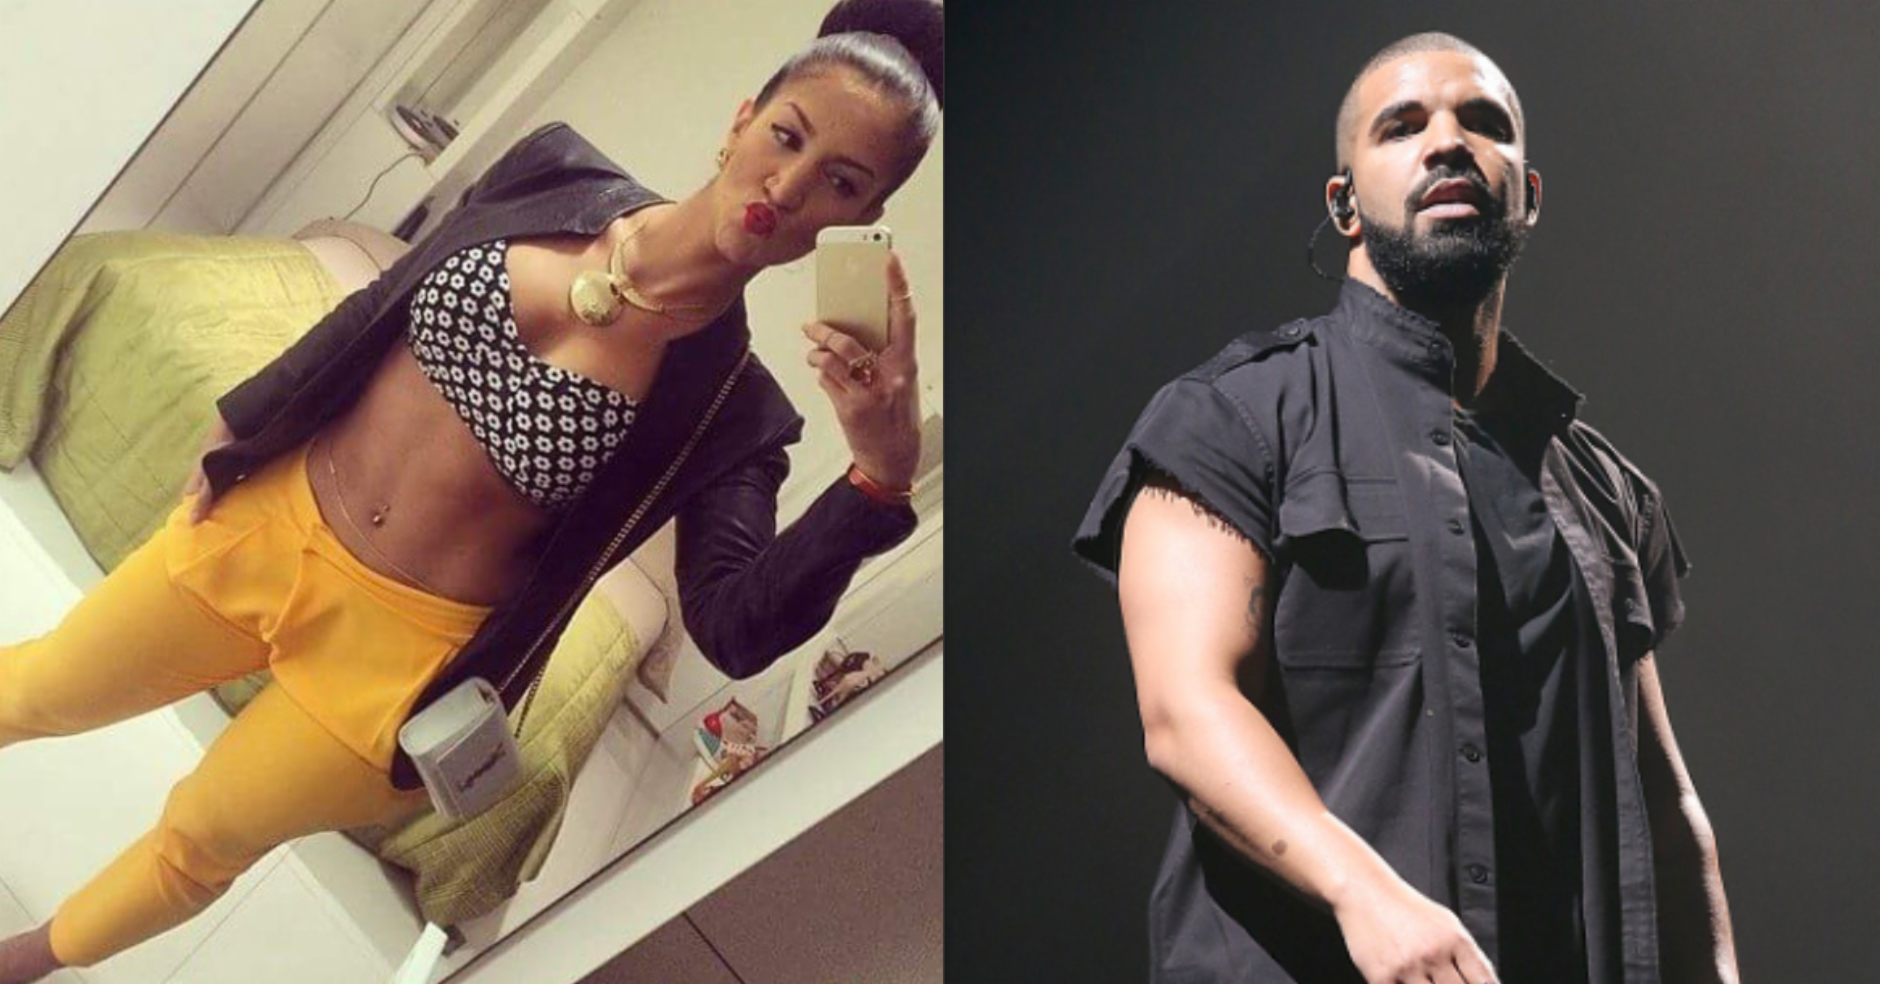 Pregnant Porn Actress - Drake Allegedly Impregnated a Former Porn Star, Then Told Her To Get Her an  Abortion - Maxim